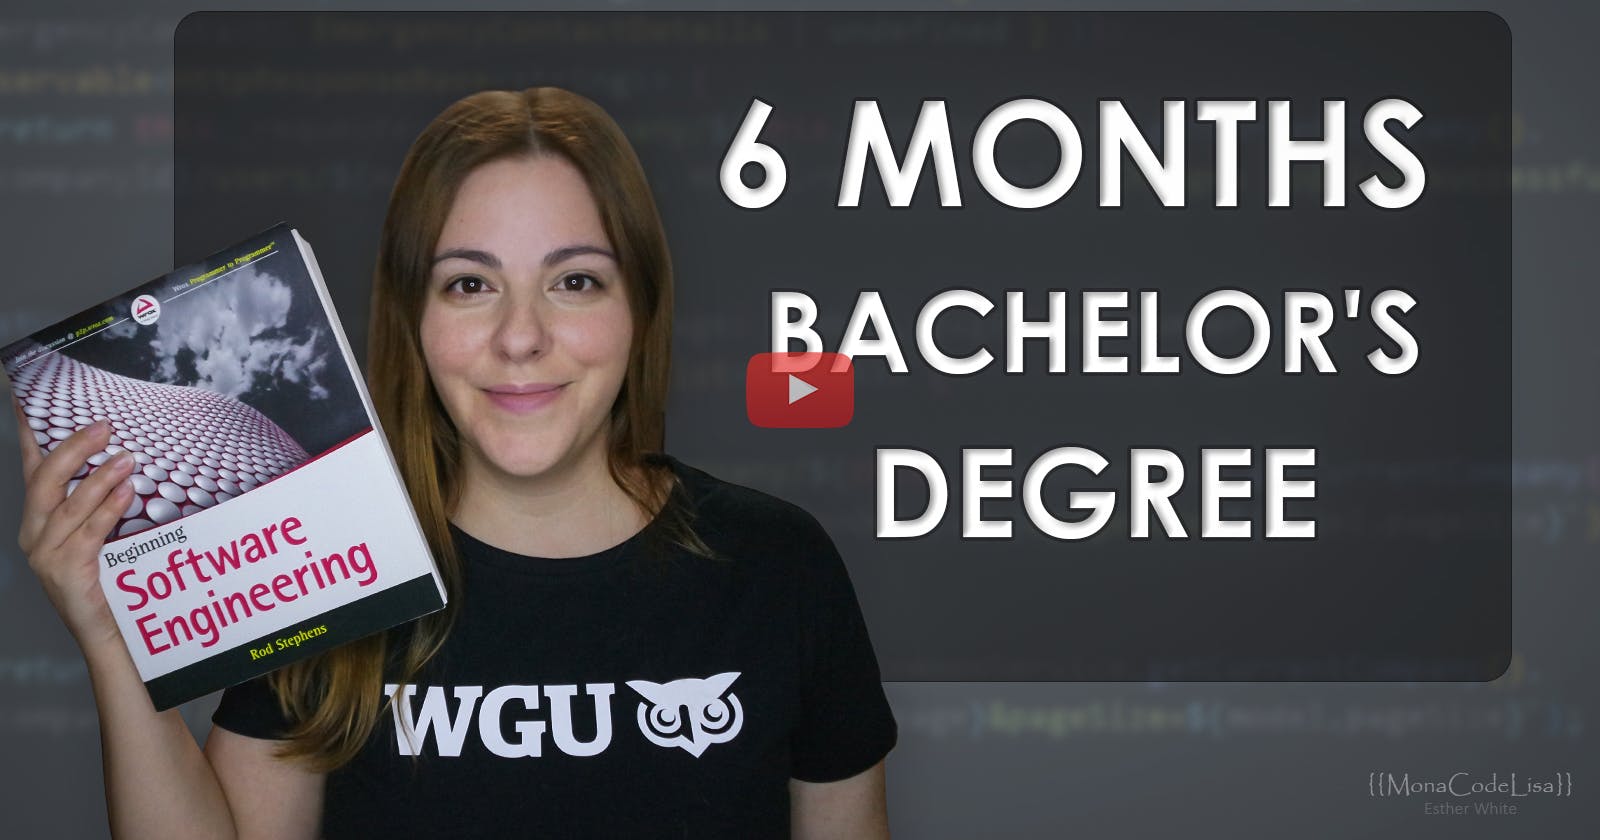 Bachelor's Degree - Software Engineering in 6 months | WGU